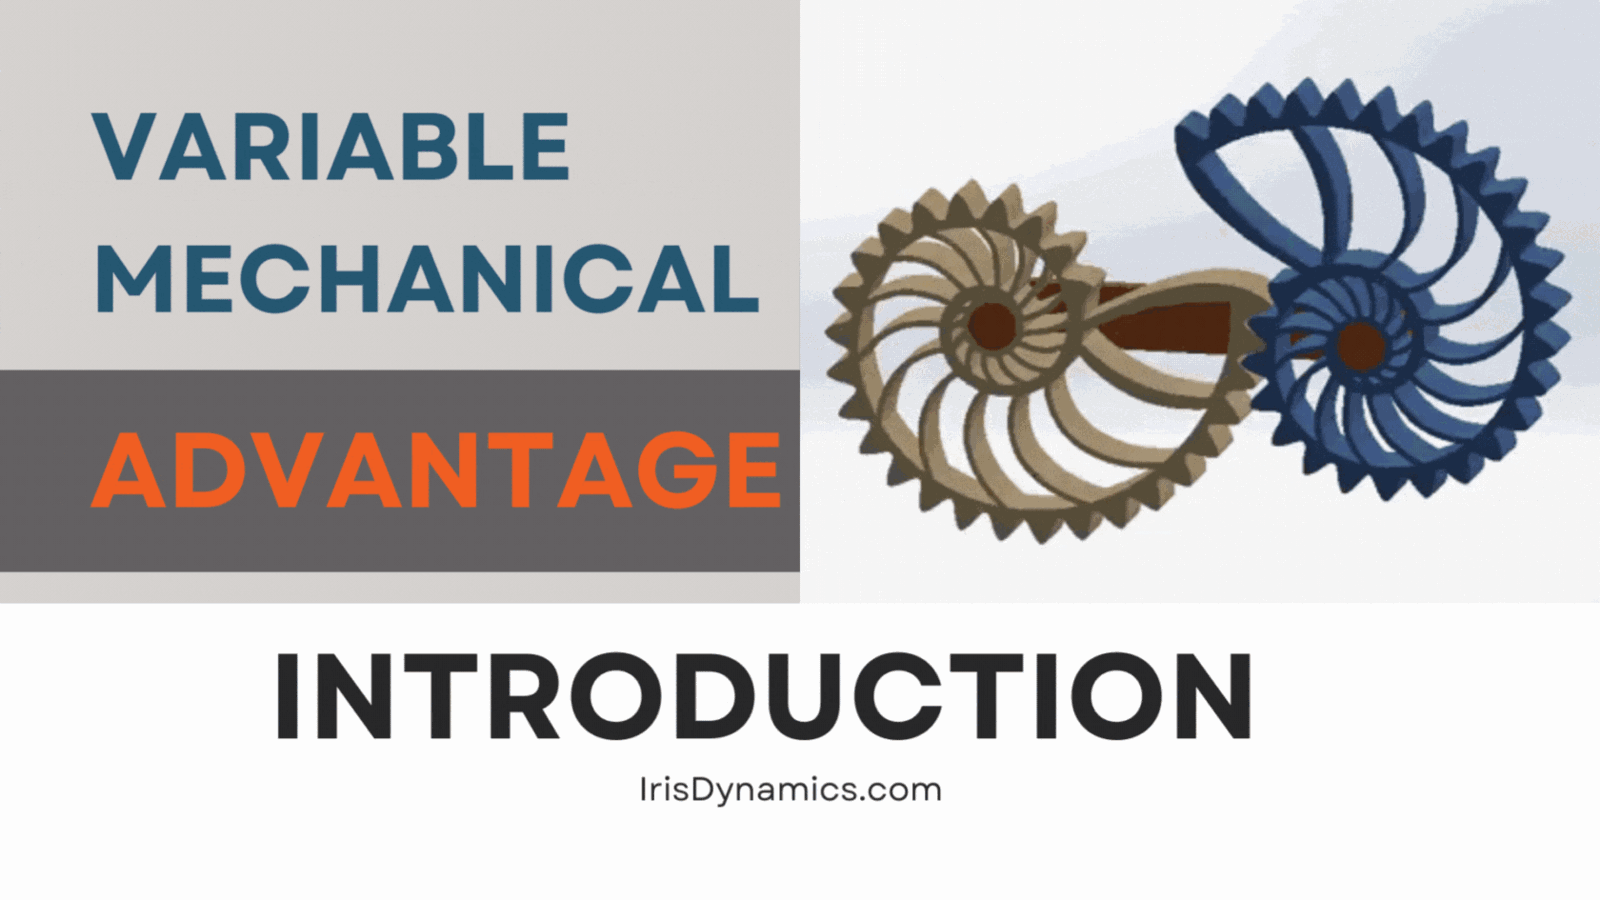 Introduction to variable mechanical advantage (VMA)